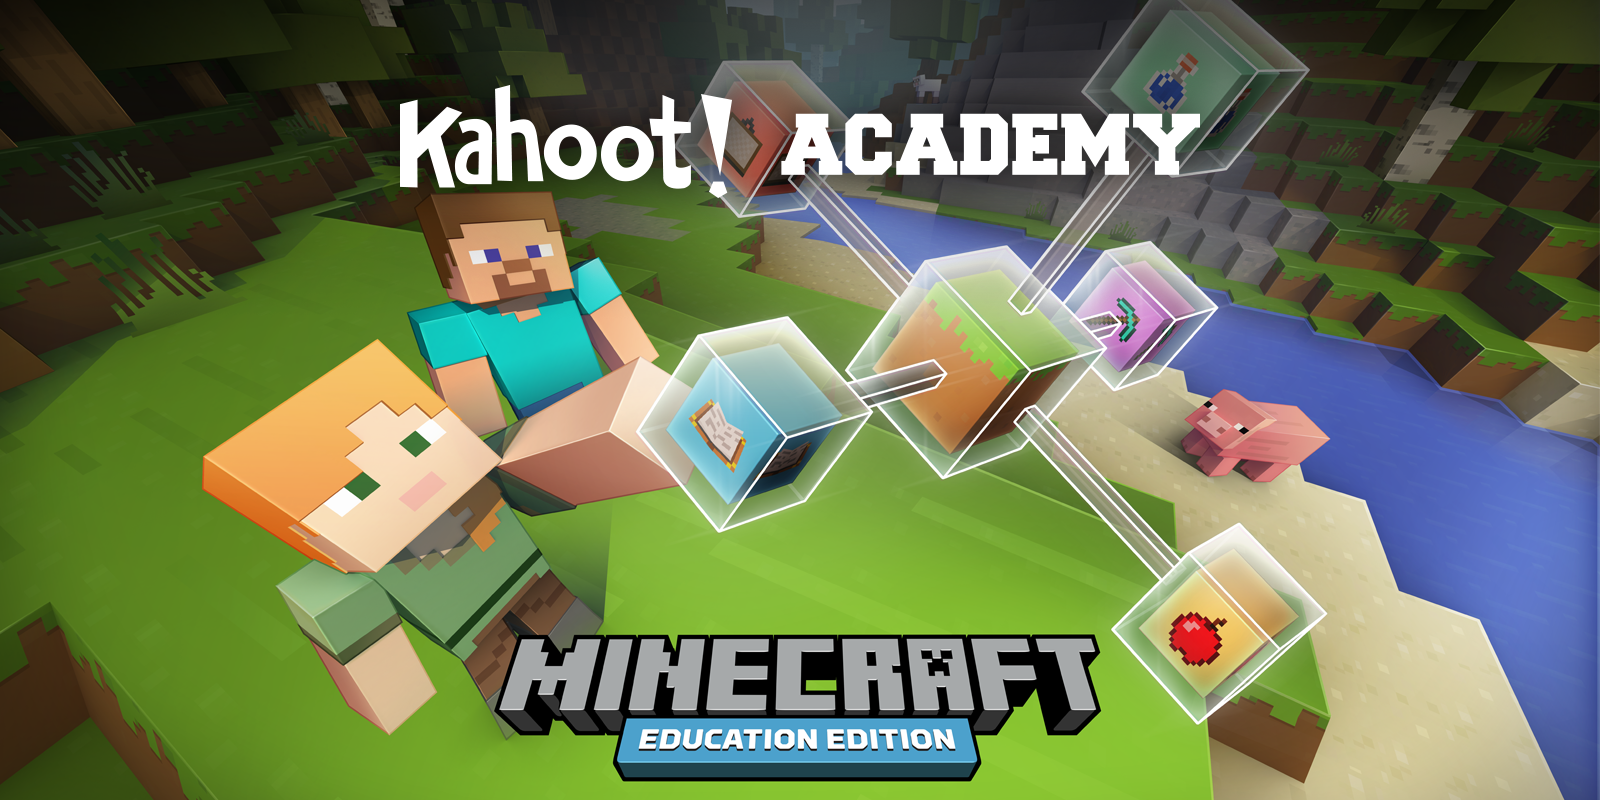 Minecraft Education - Share your Minecraft worlds and lessons